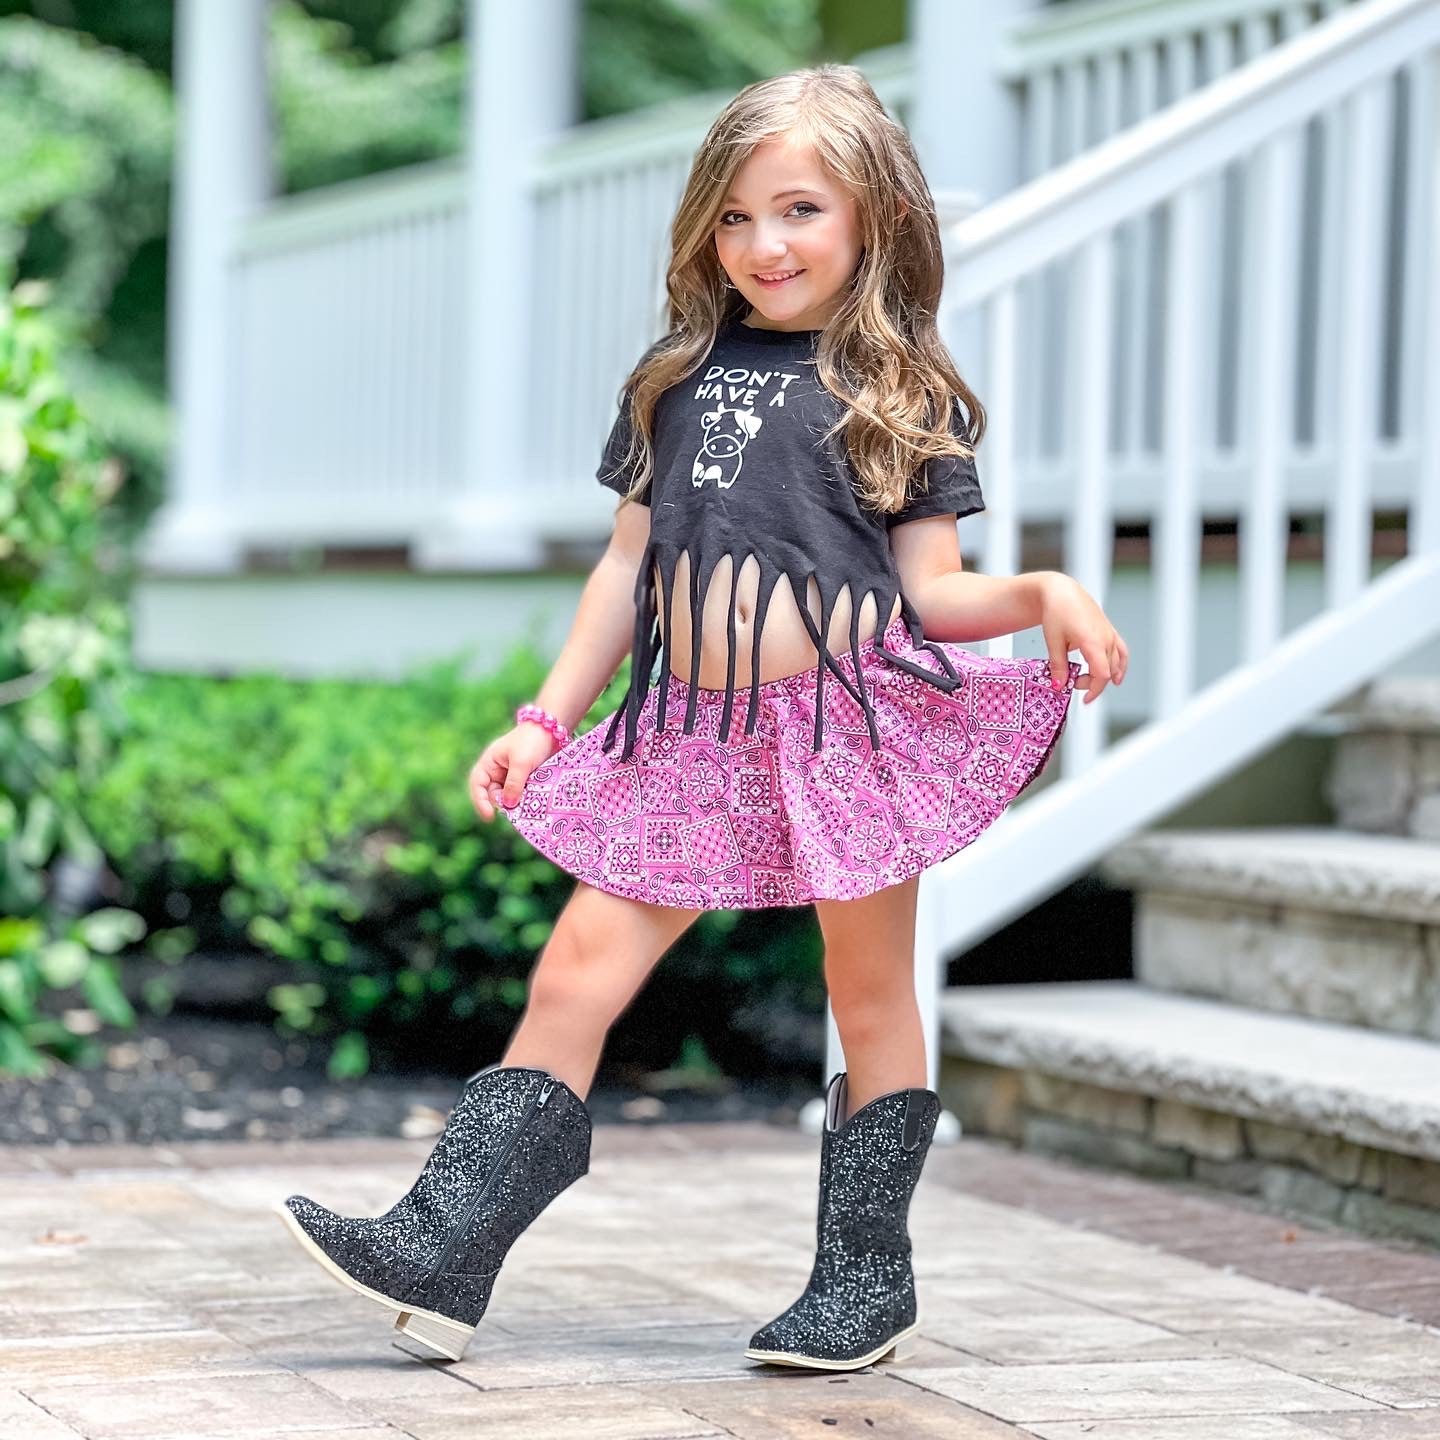 Lil’ Western Cowboy Cowgirl Boots Black Glitter ❣️We recommend to size up! ❣️